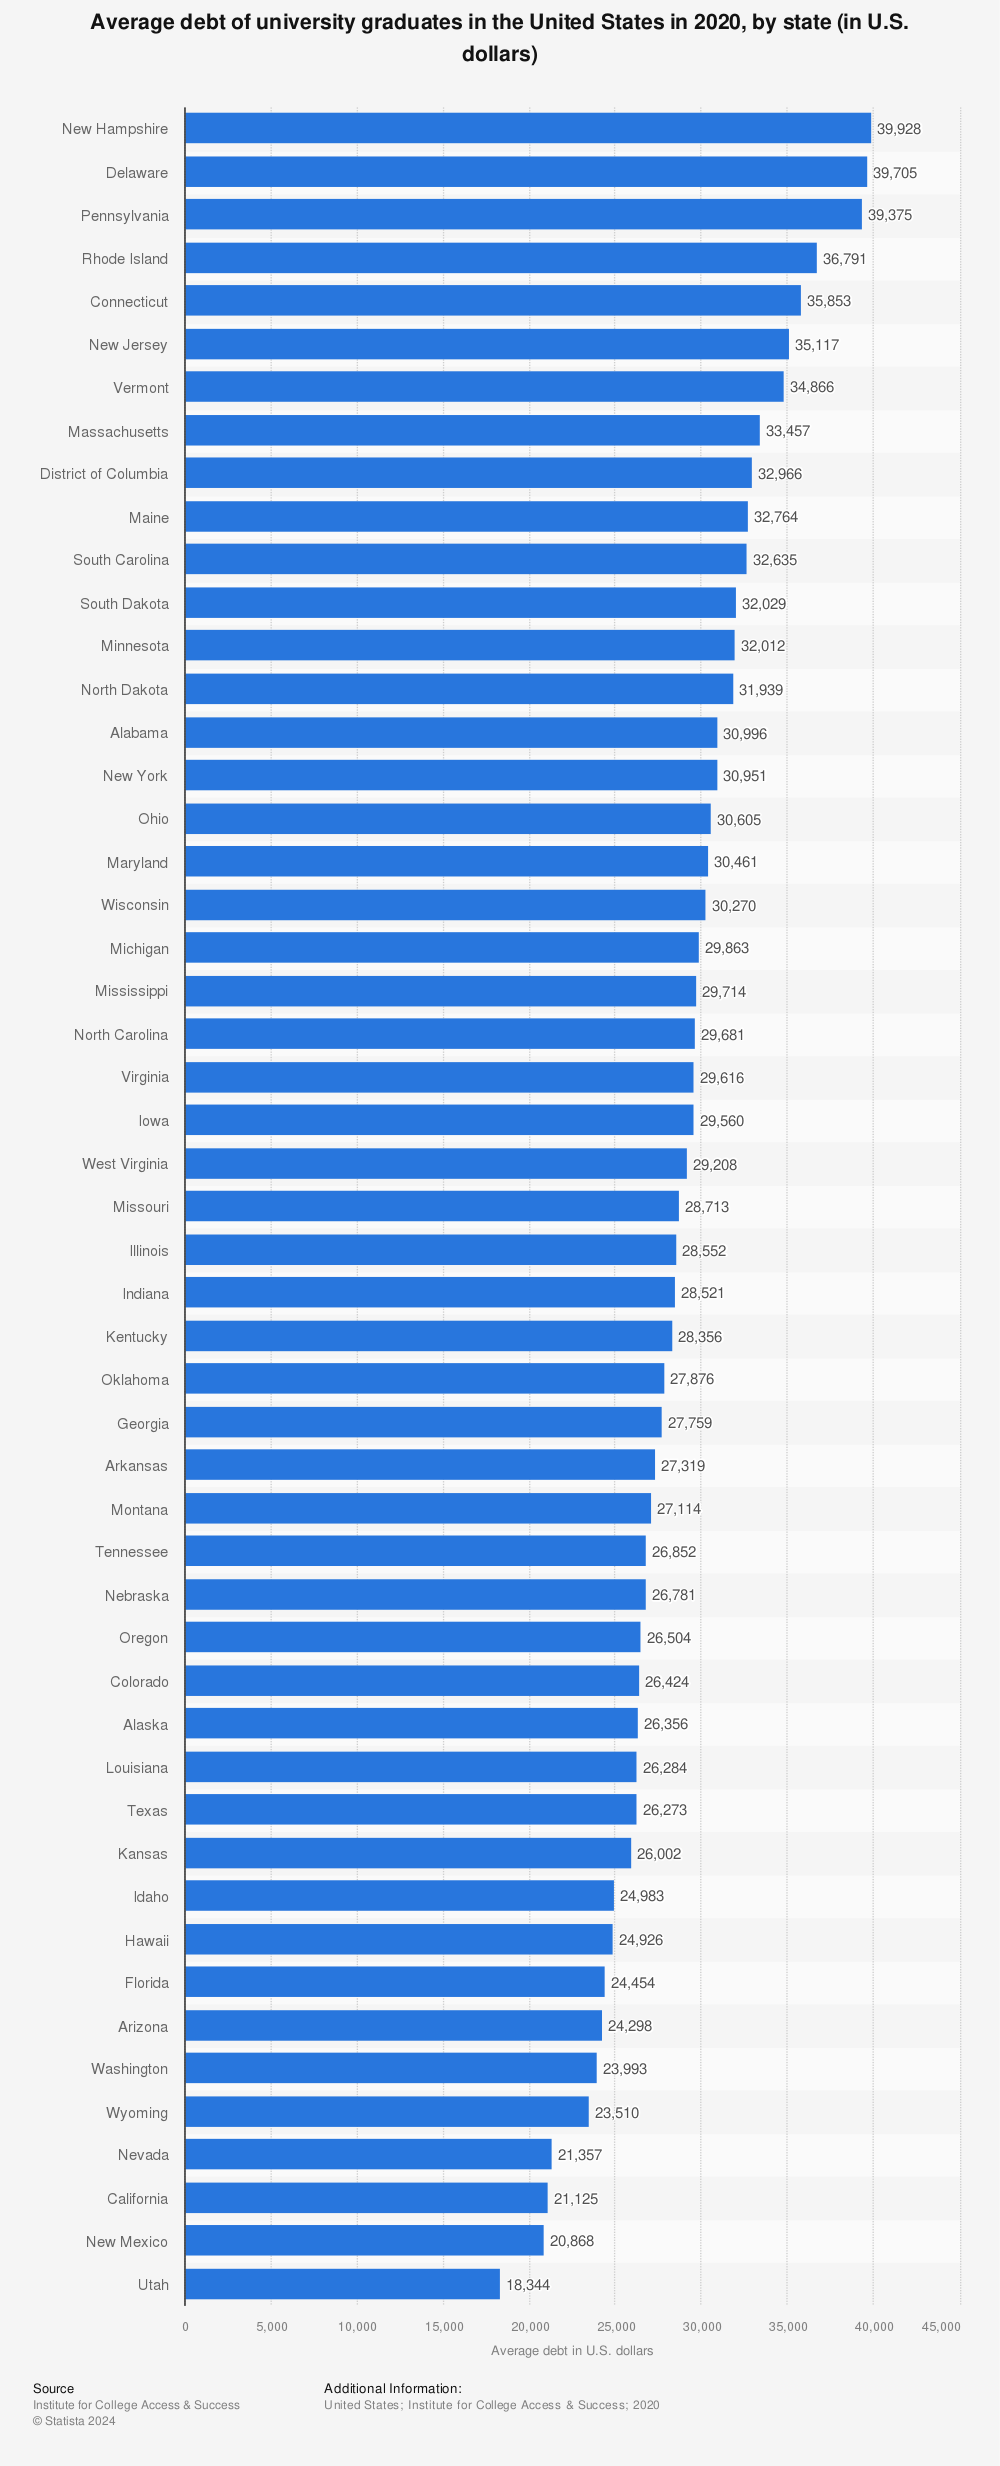 Statistic: Average debt of university graduates in the United States in 2020, by state (in U.S. dollars) | Statista